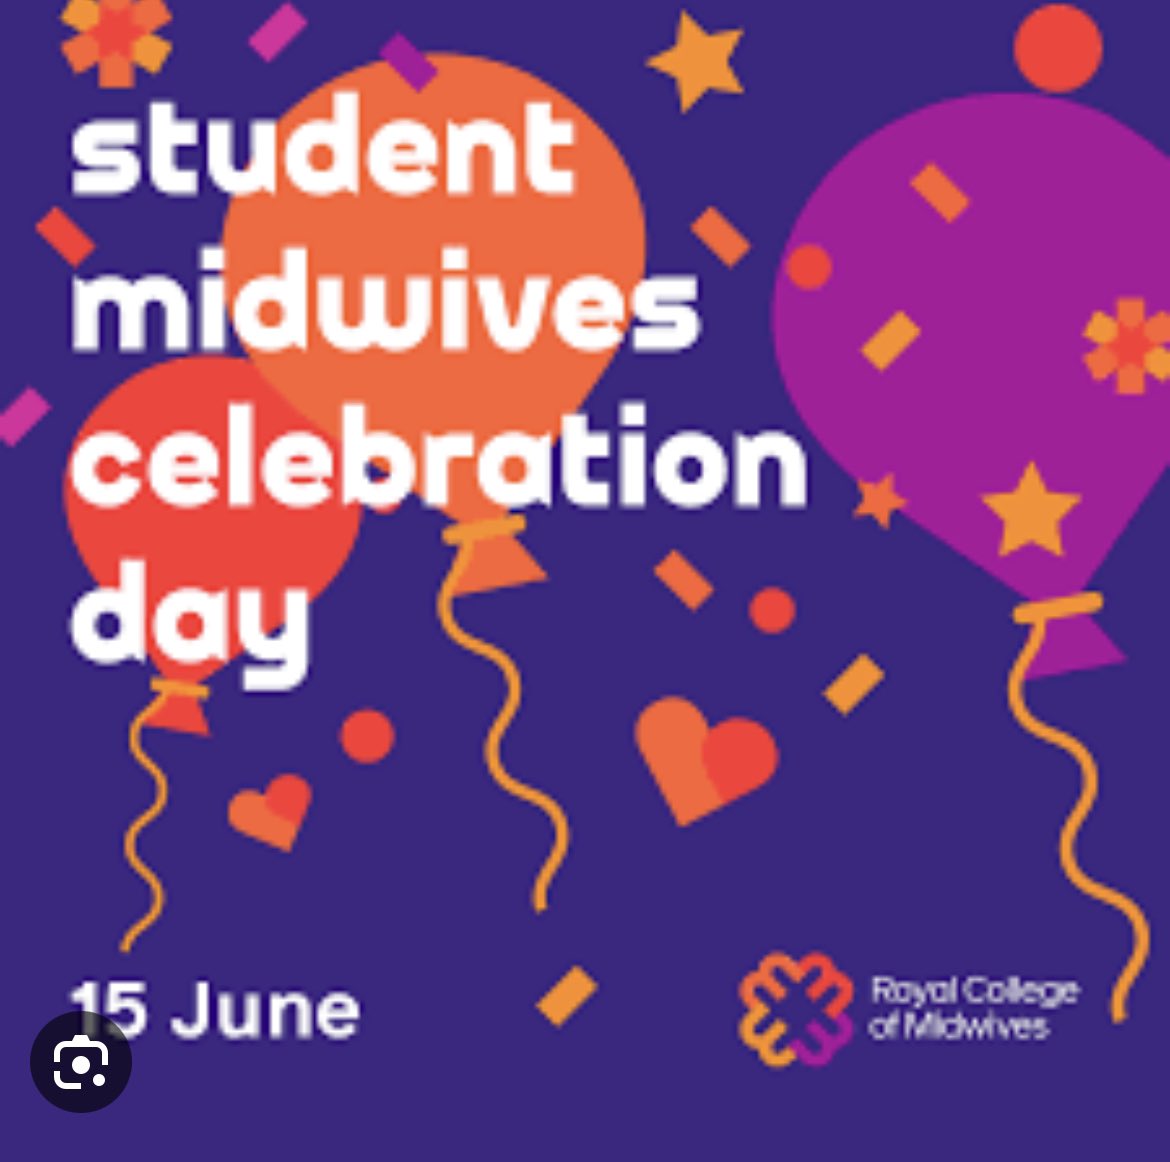 We celebrate you everyday but it’s exciting to have an official day! #studentmidwivesday